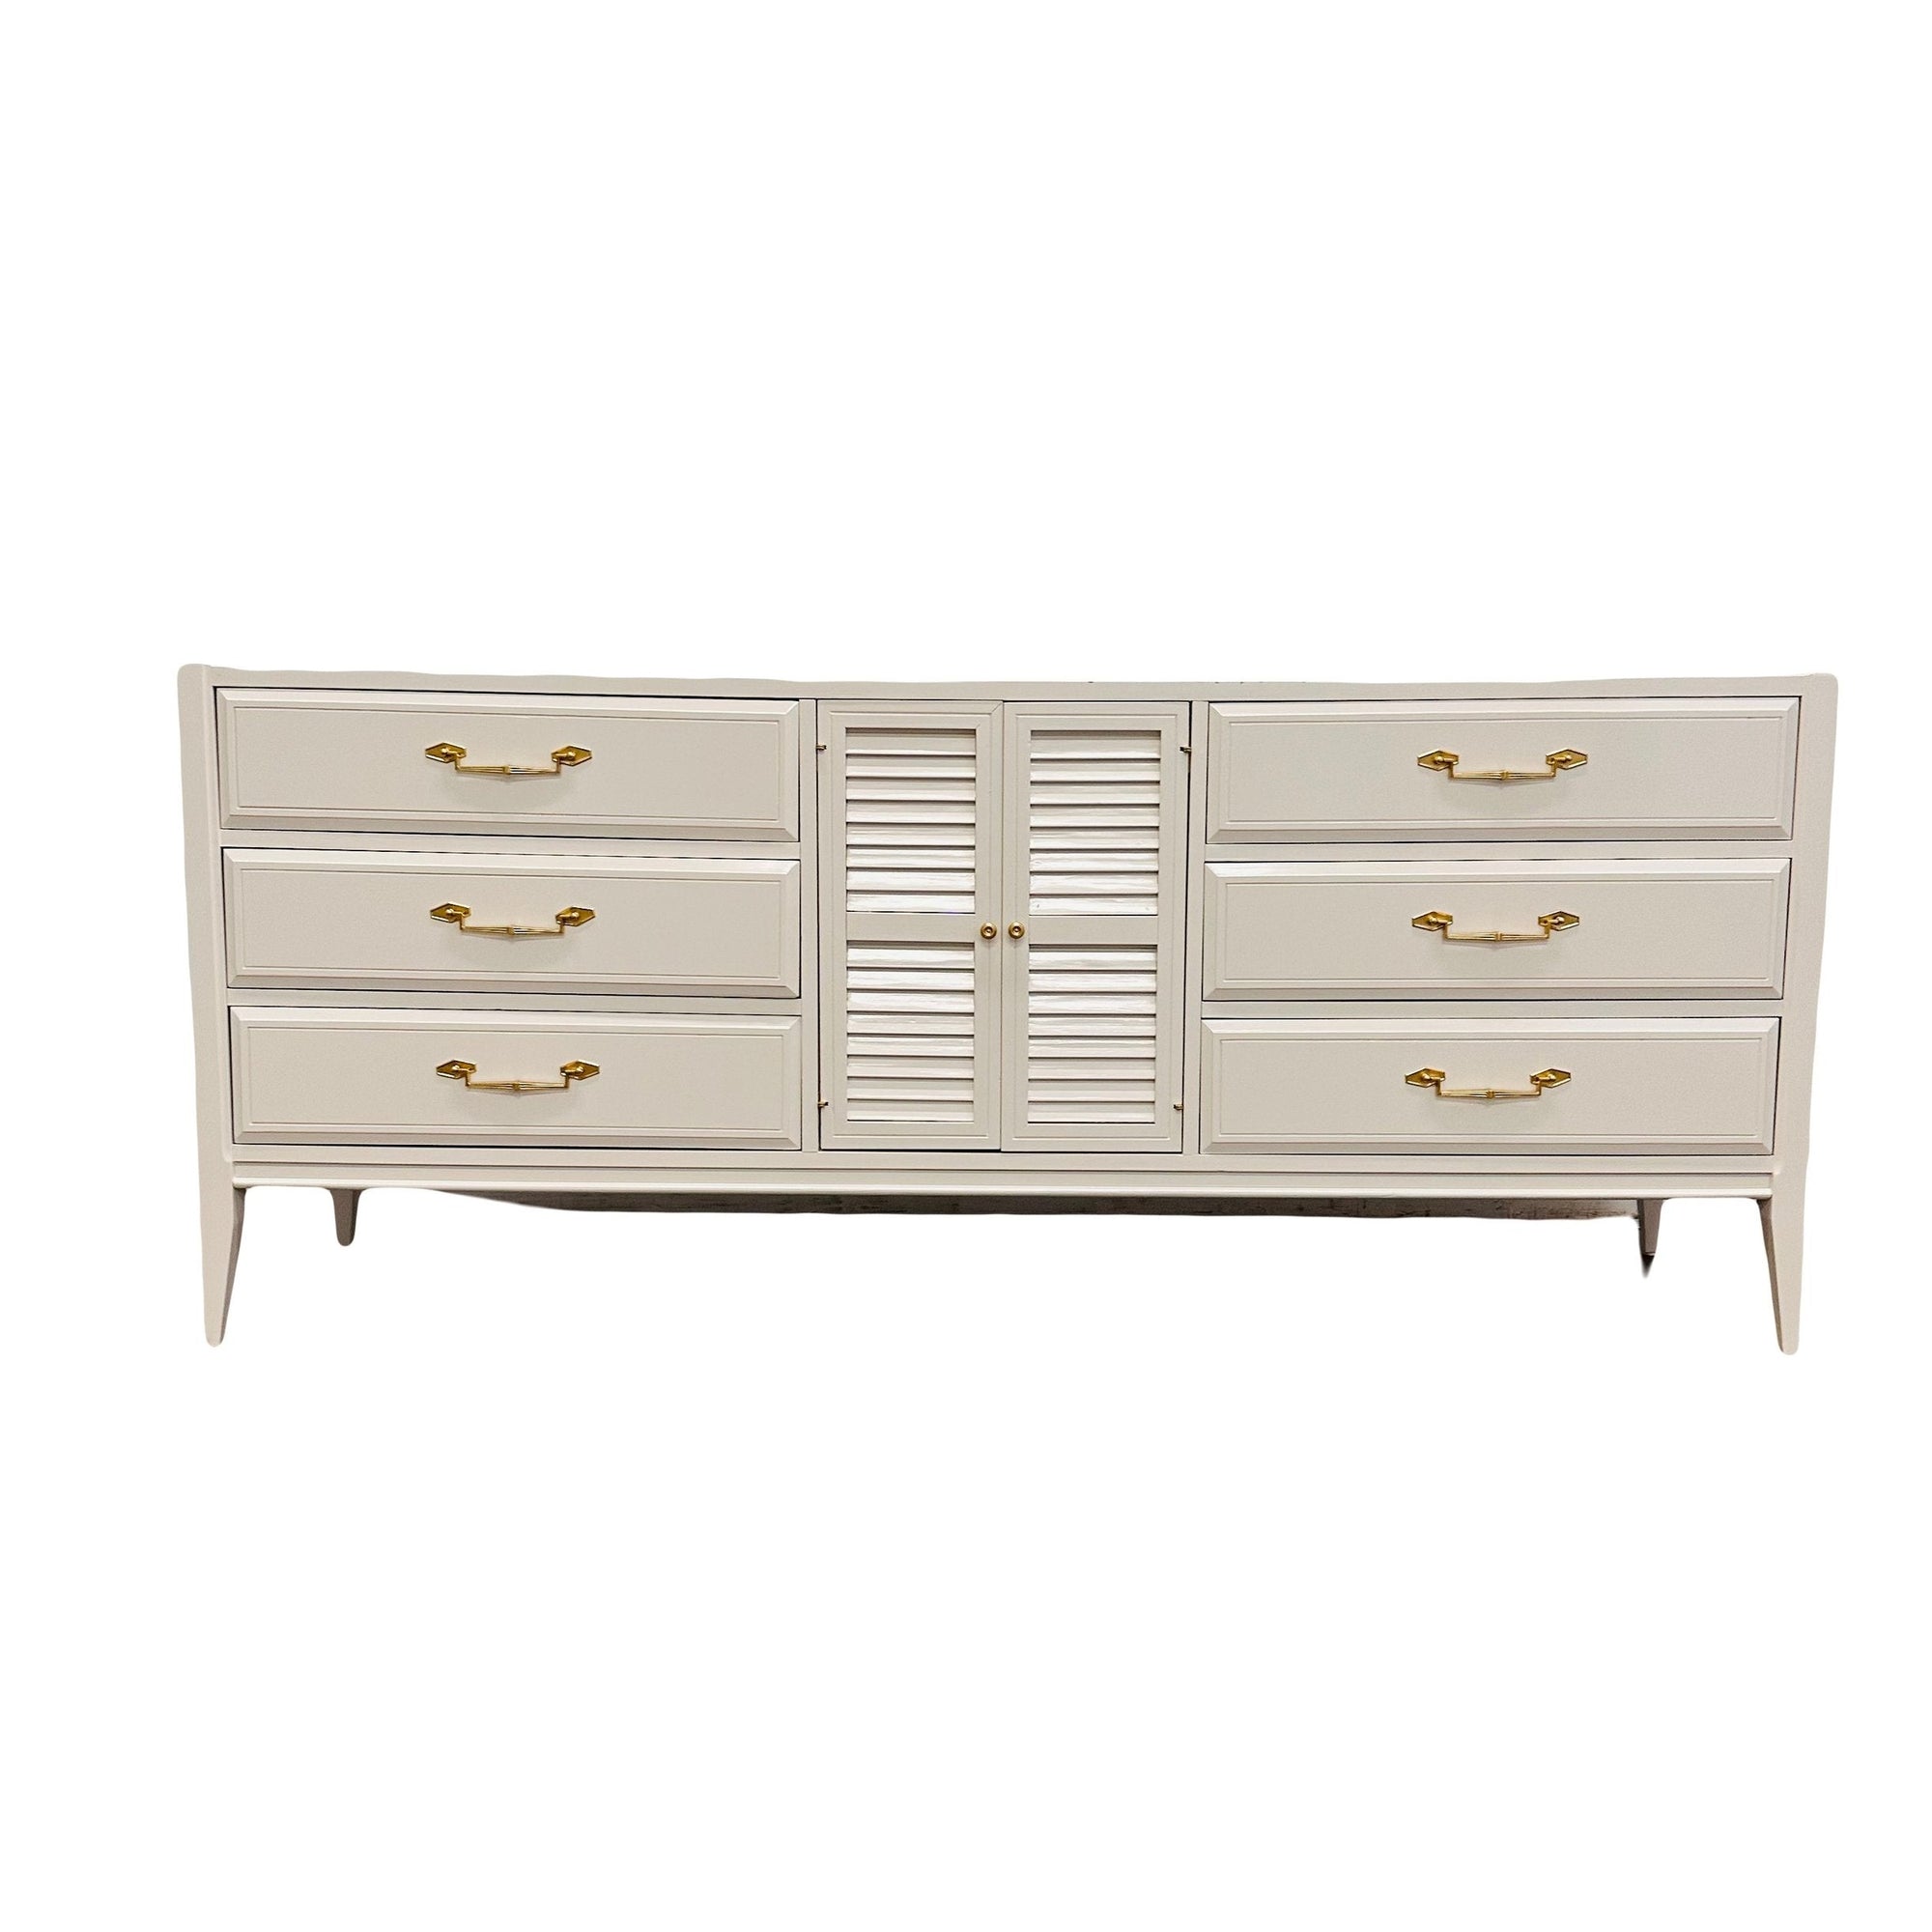 AVAILABLE: Pearly White Transitional Basic-Witz Dresser